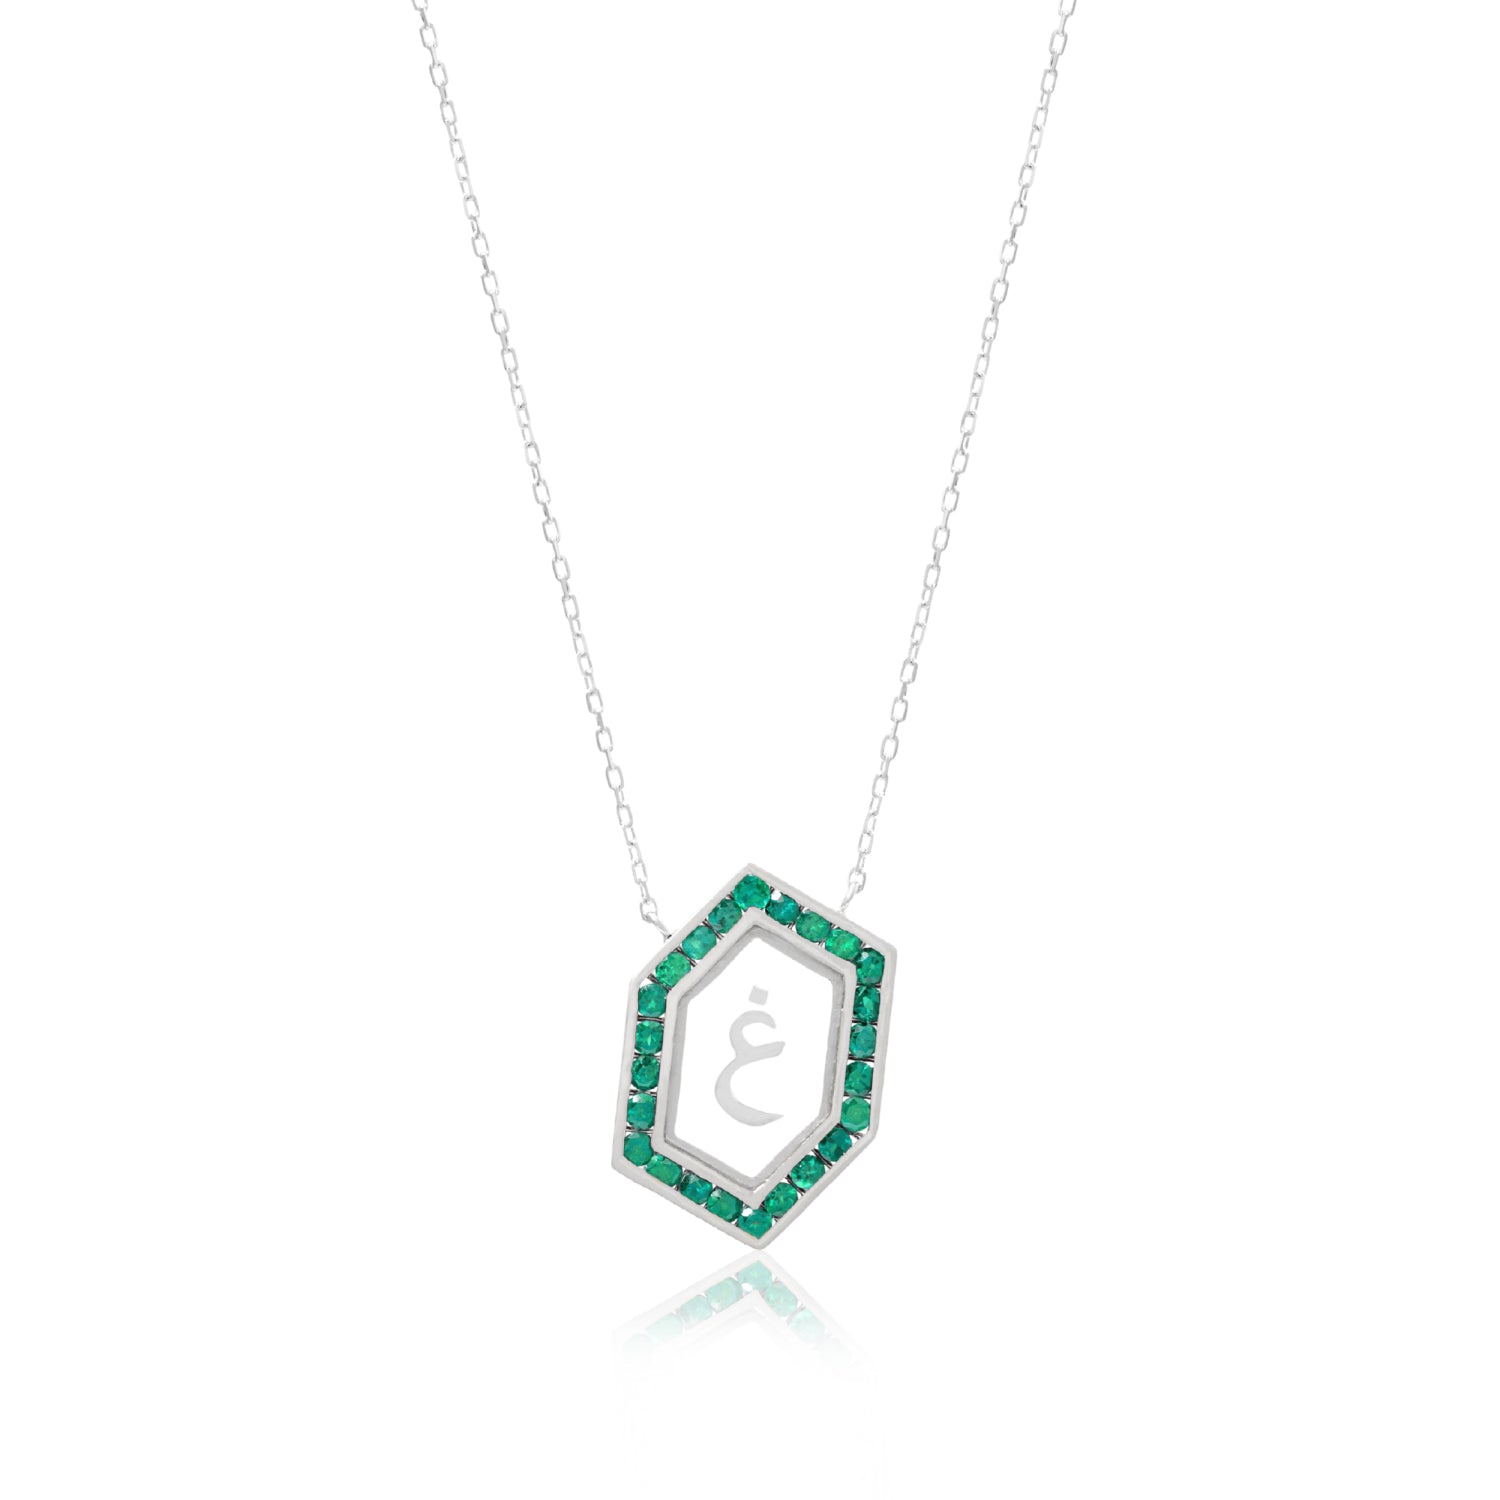 Qamoos 1.0 Letter غ Emerald Necklace in White Gold